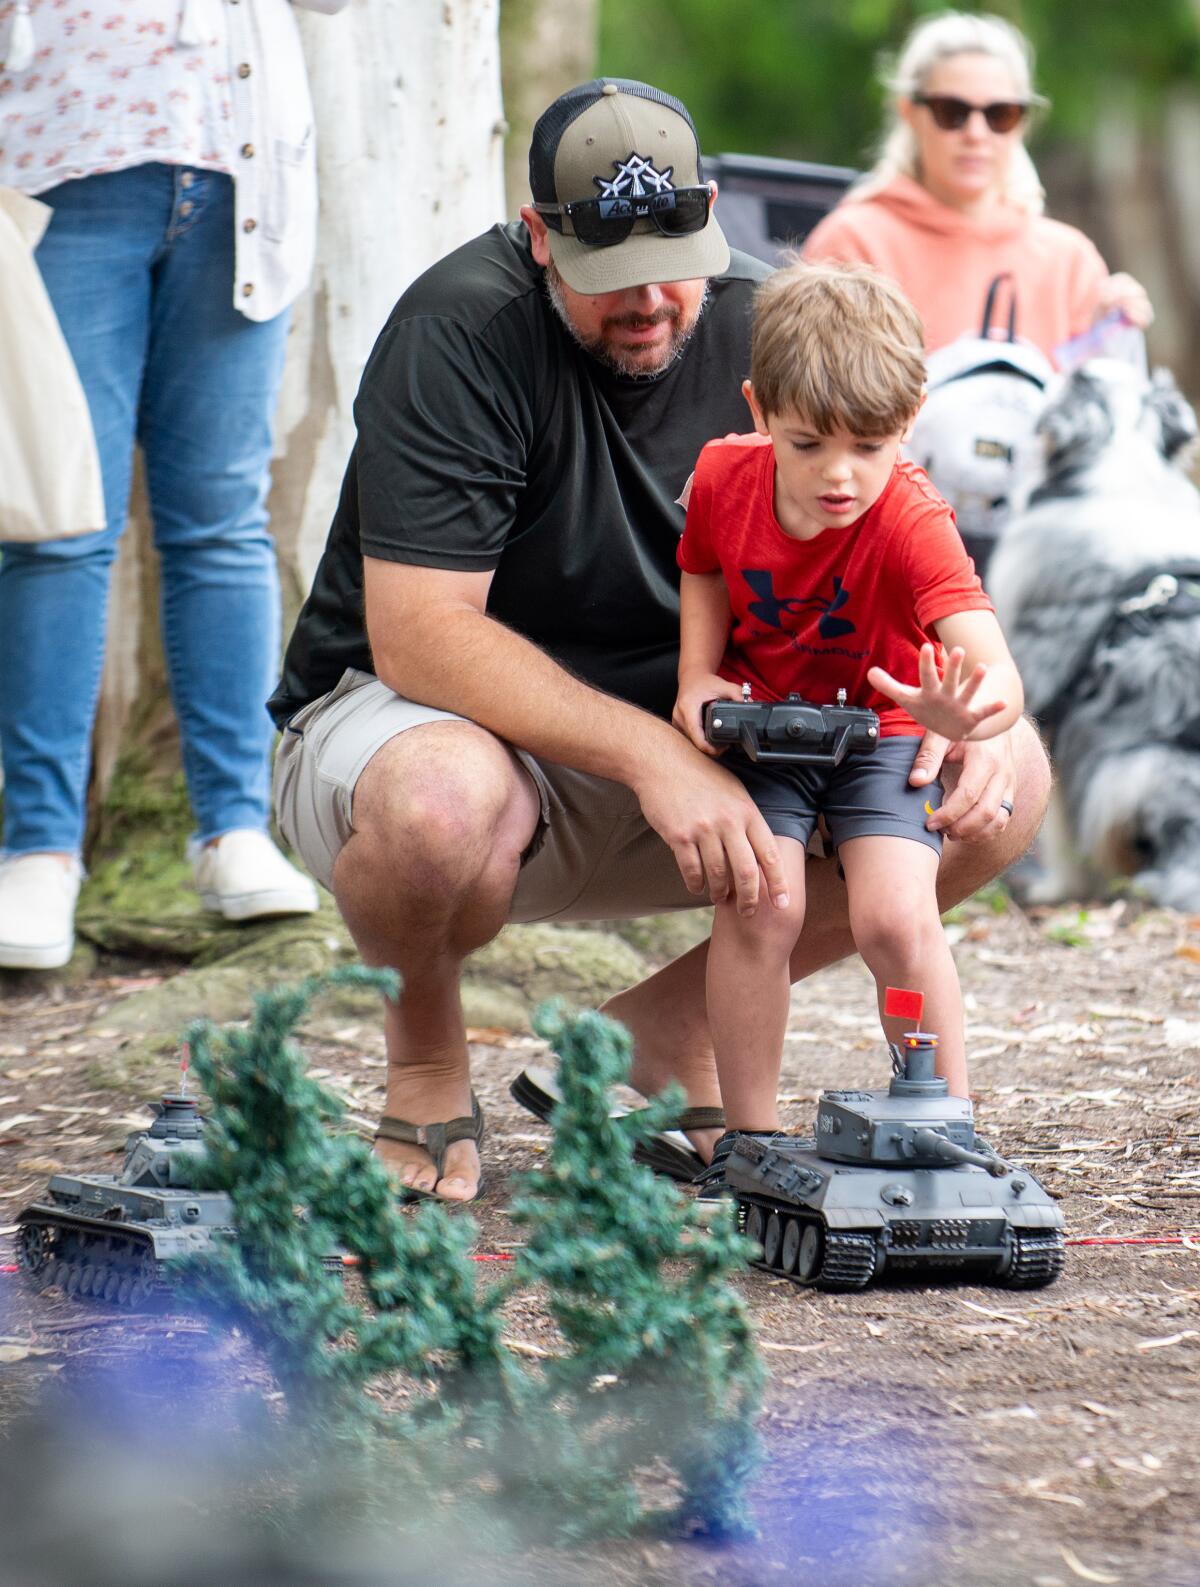 Jake, 4, reaches out to touch a remote-controlled RC tank at Huntington Central Park.